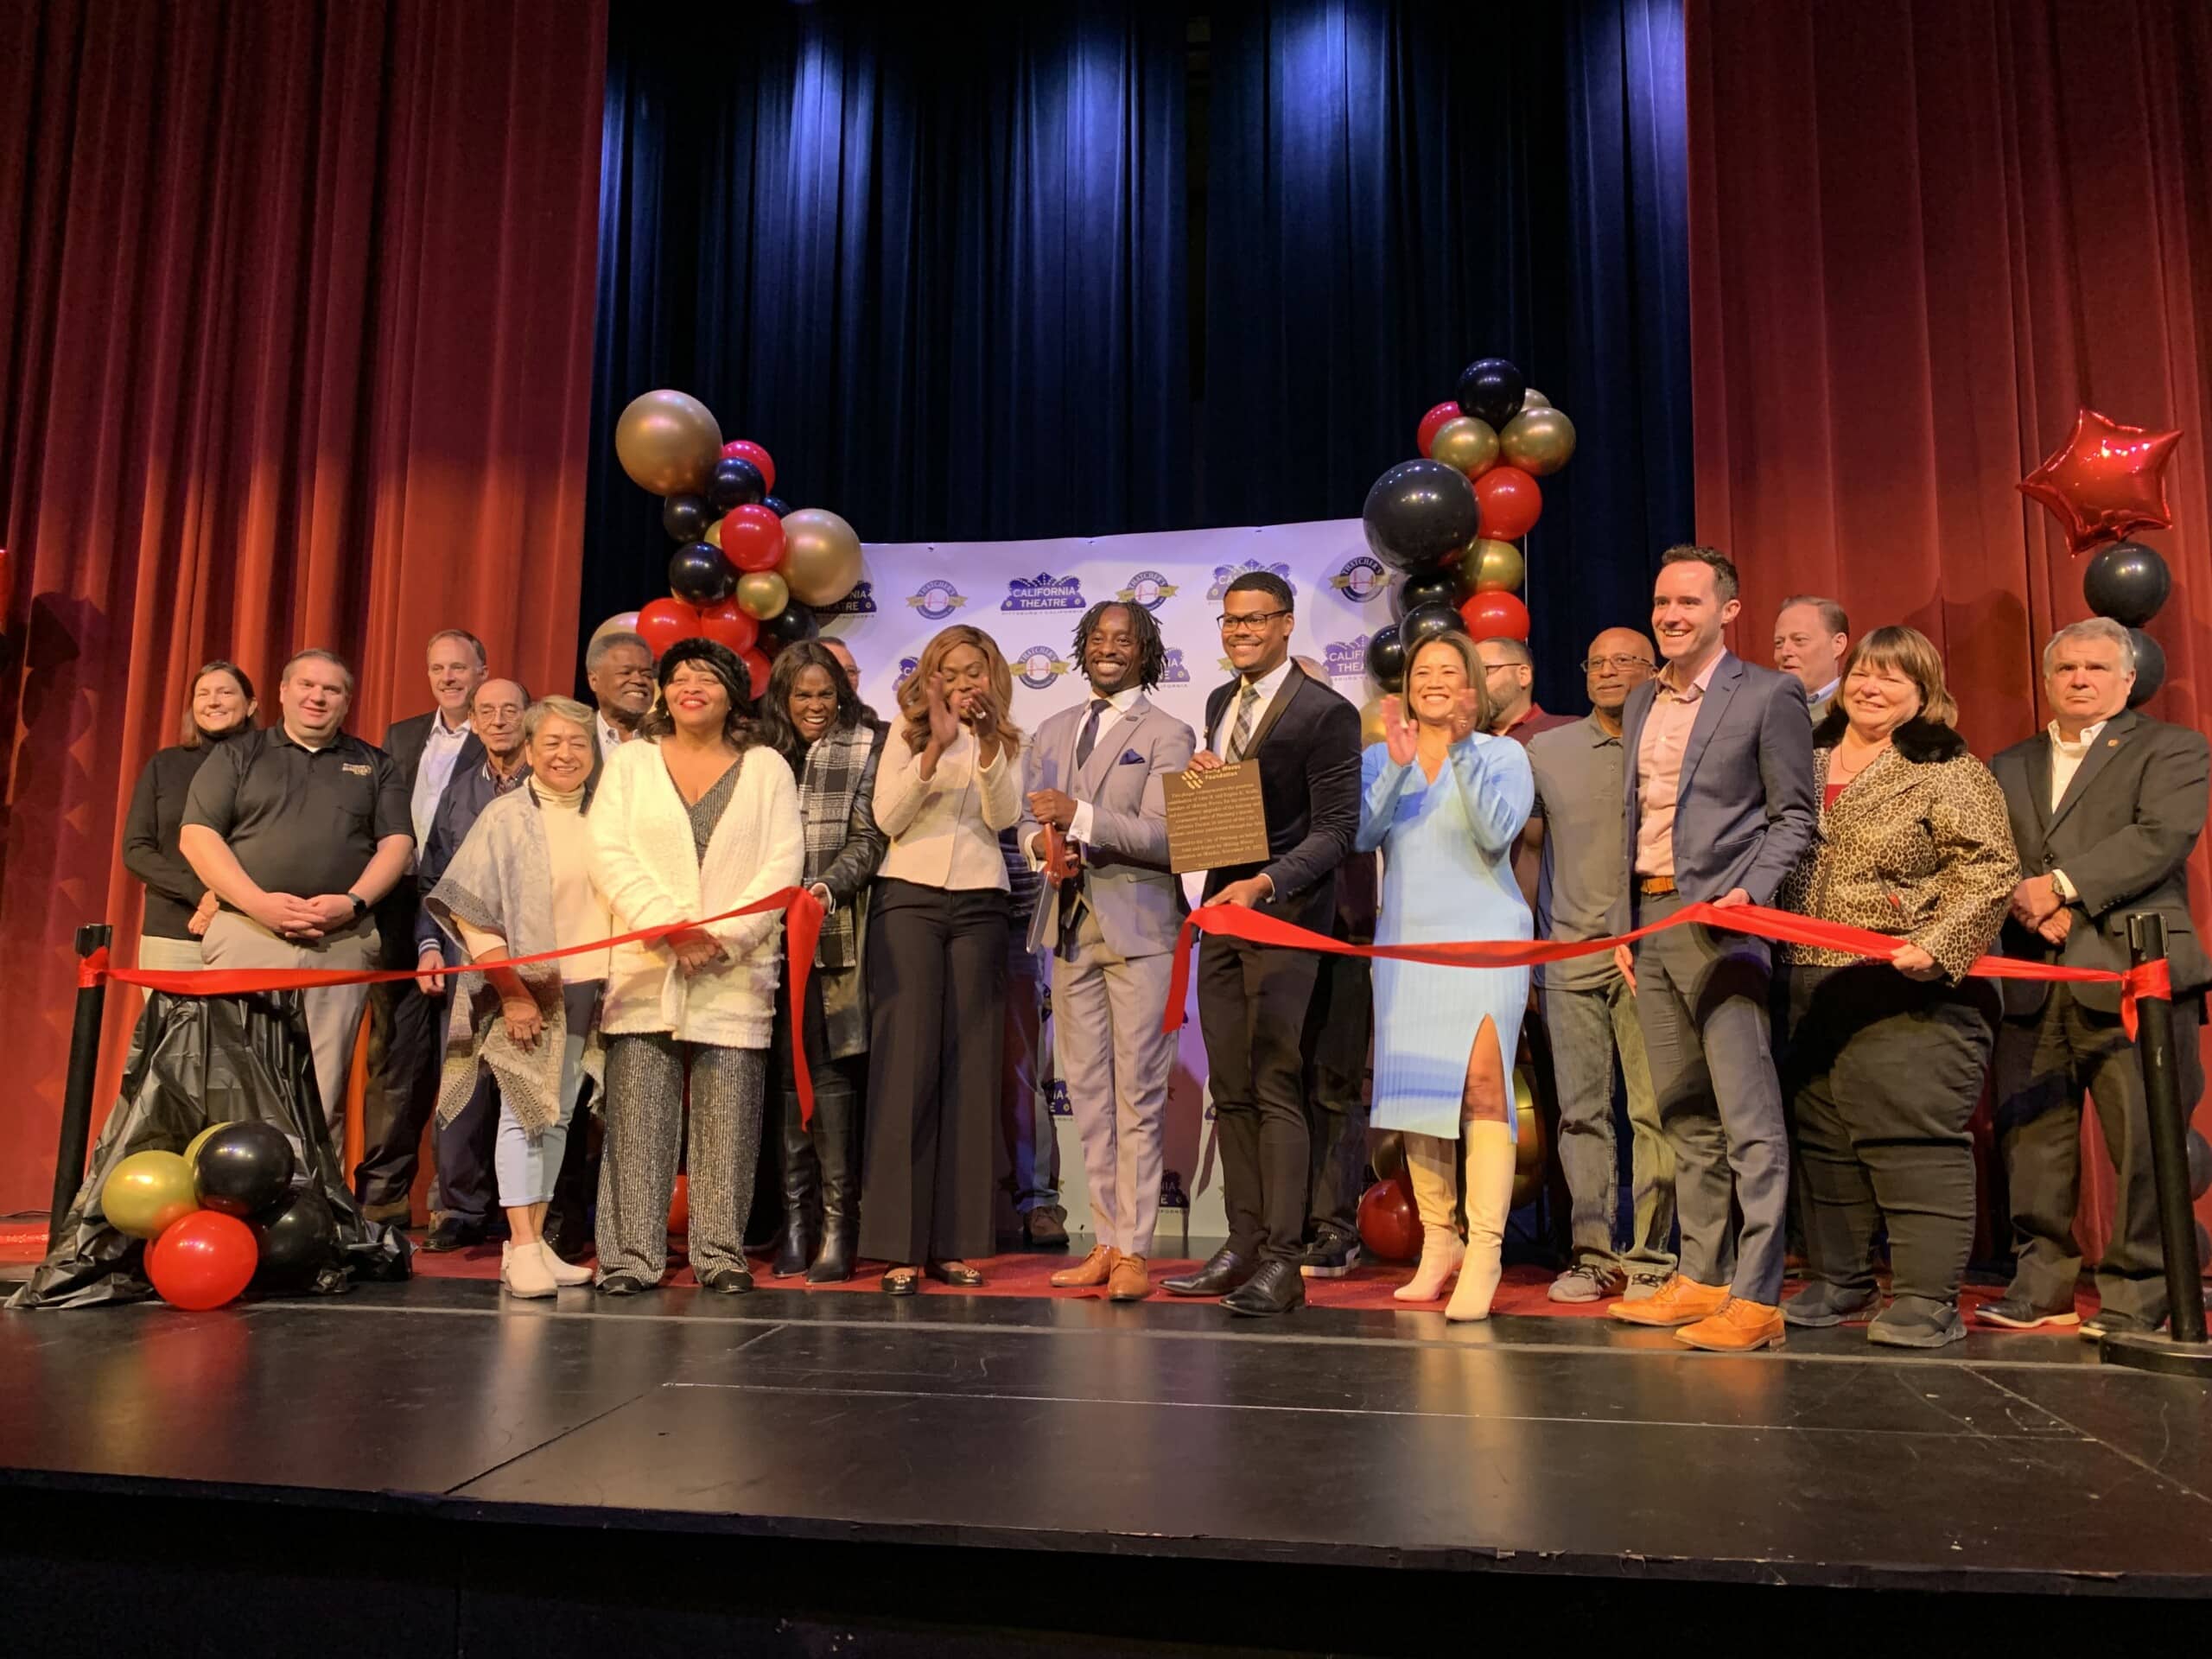 Building Community: Making Waves Community Celebrates California Theatre Re-Opening